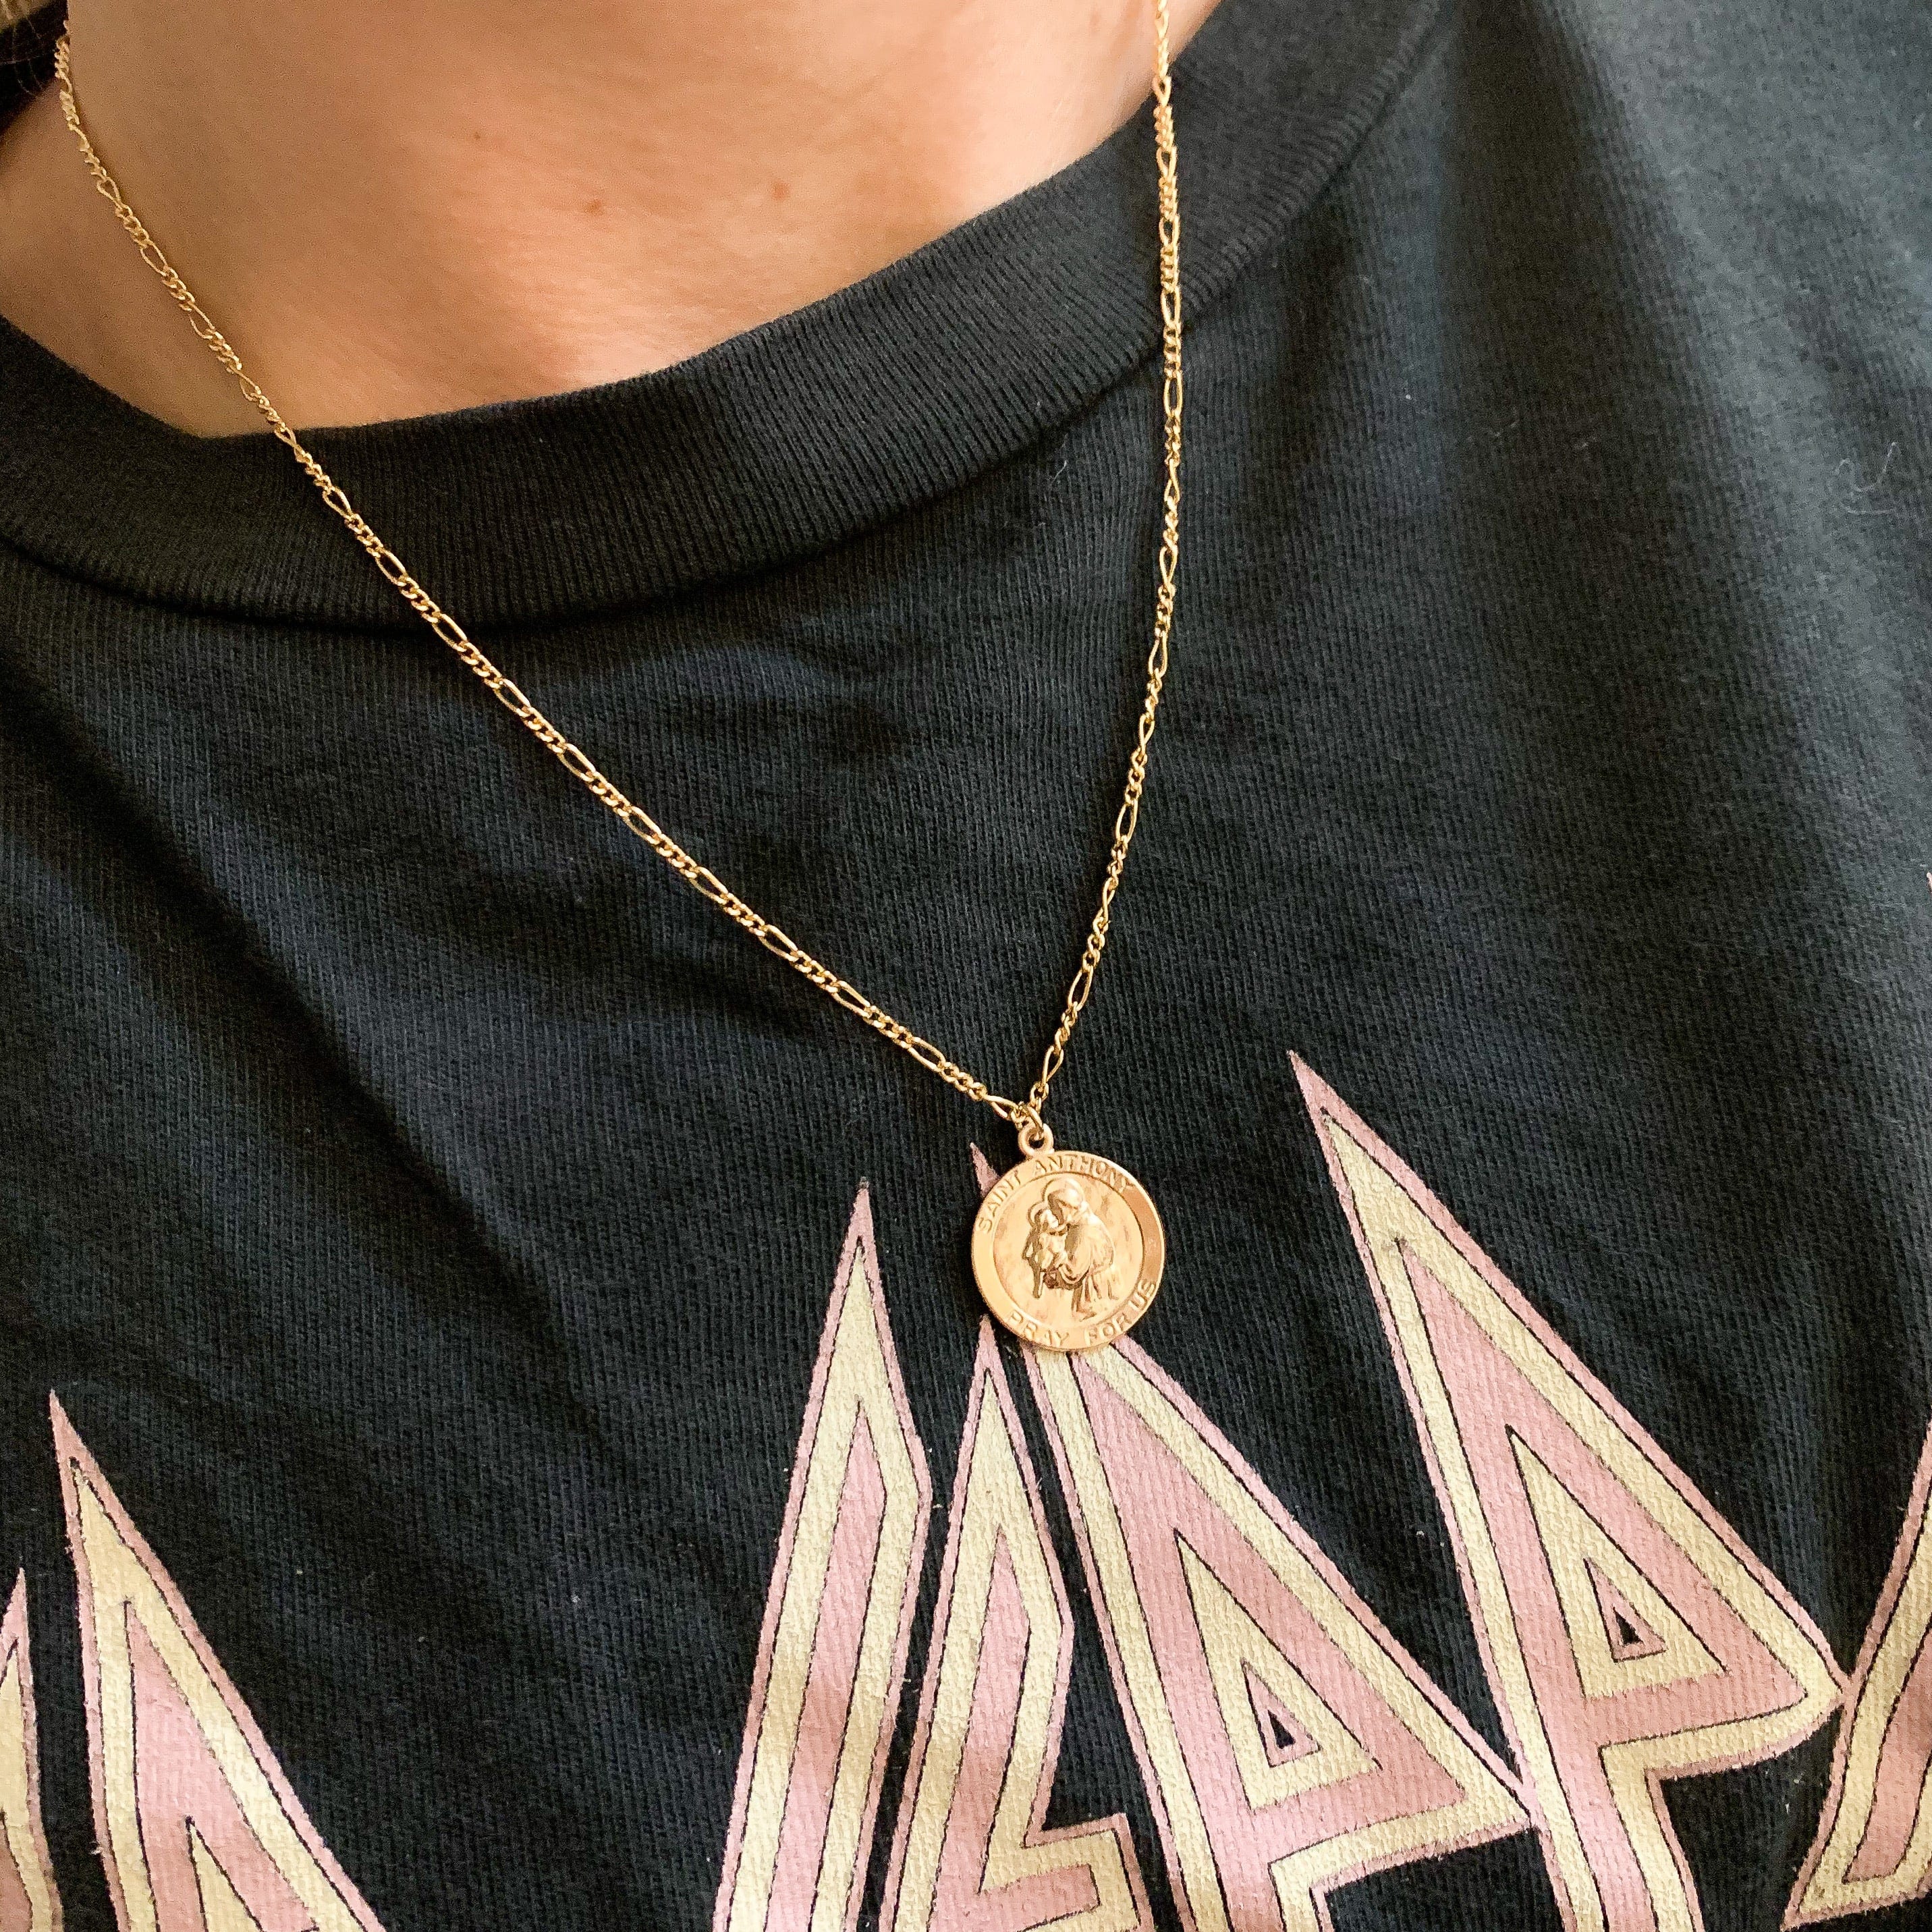 PALACE SKATEBOARDS COIN PENDANT GOLD